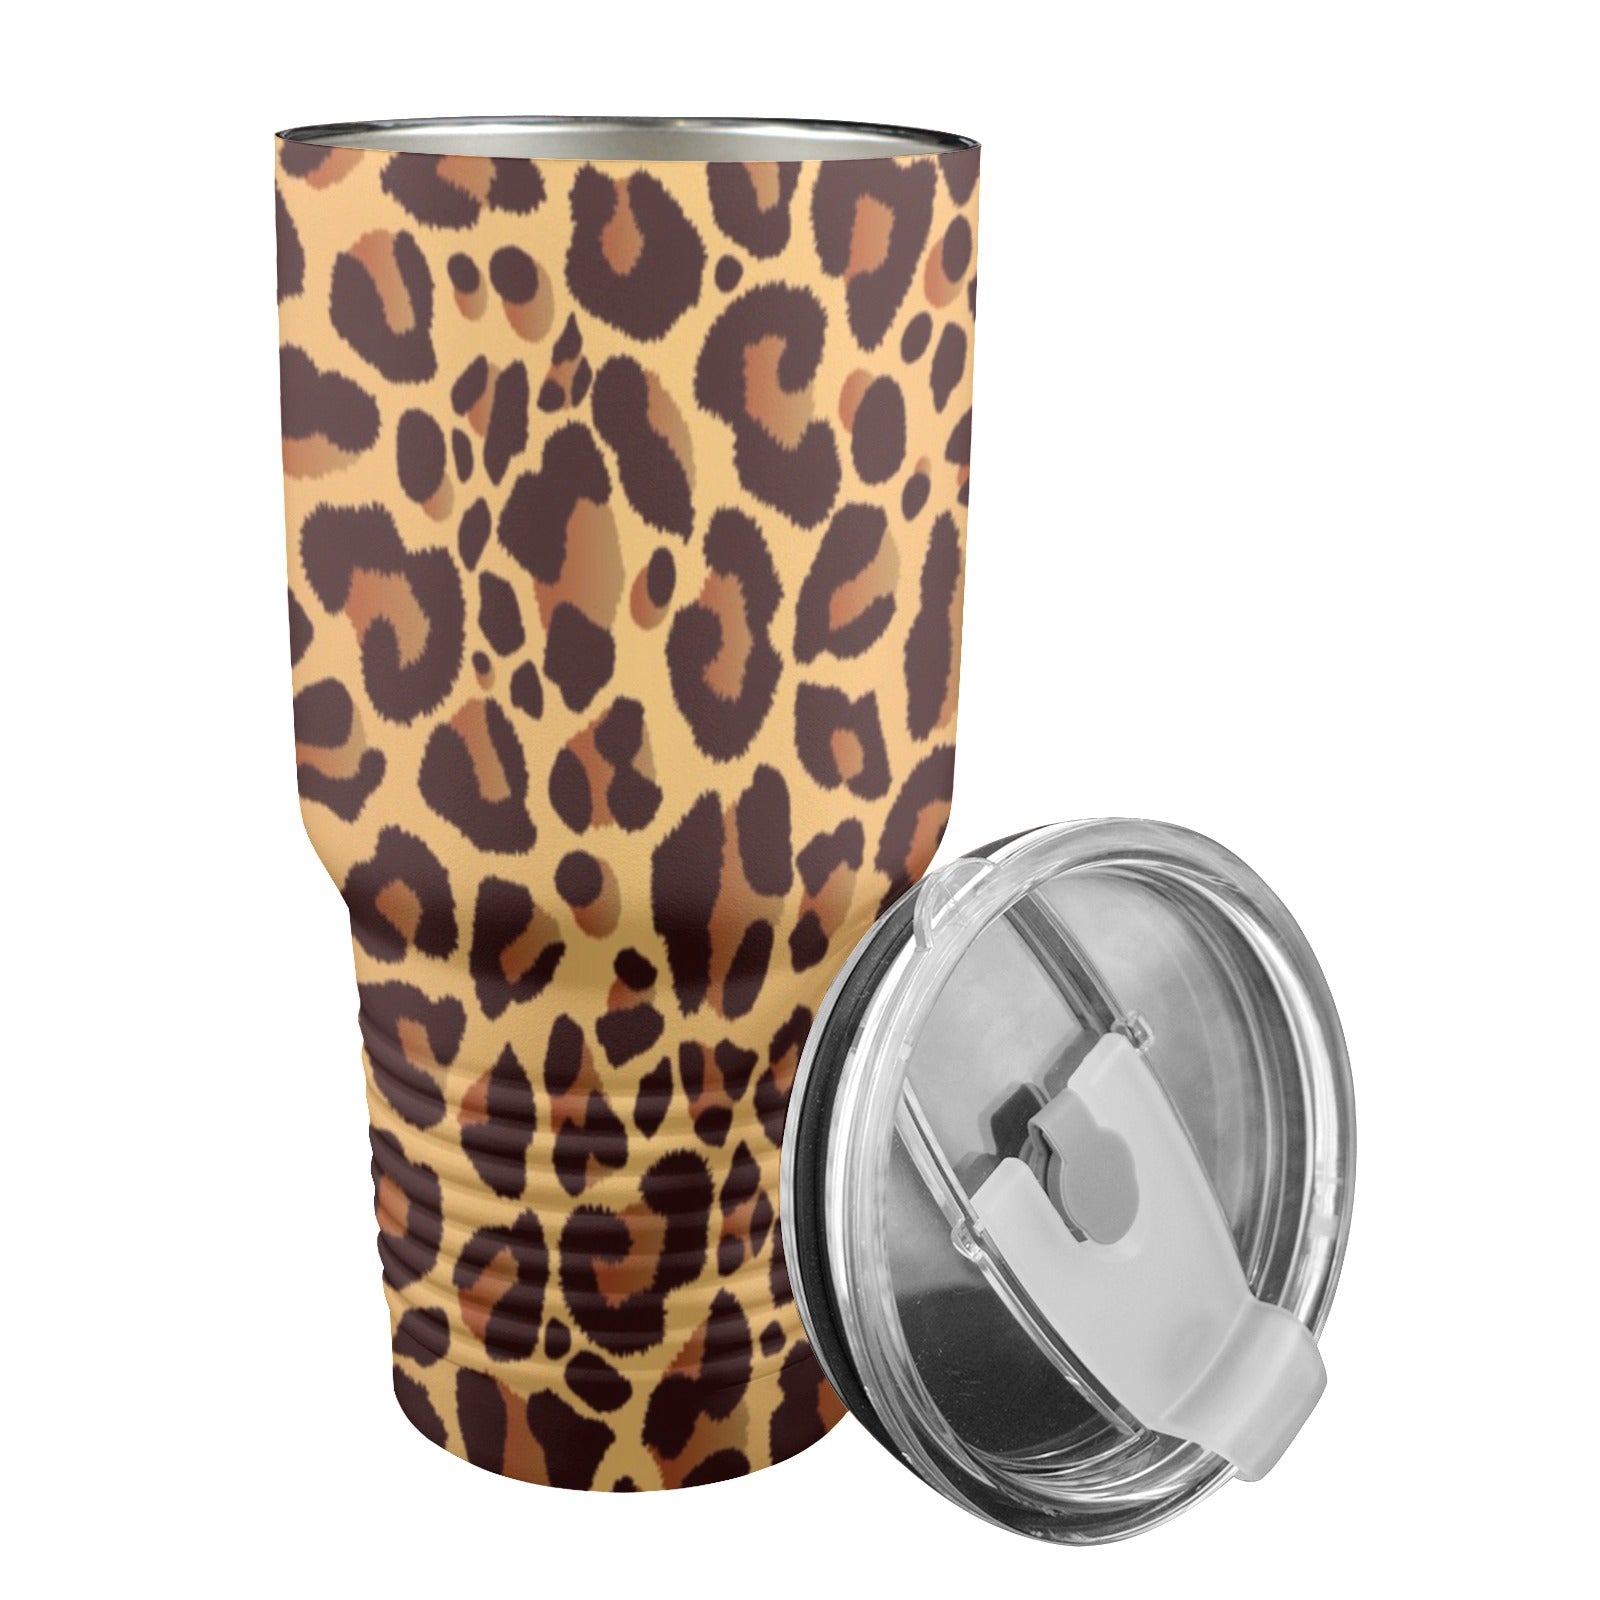 Leopard Print - 30oz Insulated Stainless Steel Mobile Tumbler 30oz Insulated Stainless Steel Mobile Tumbler animal